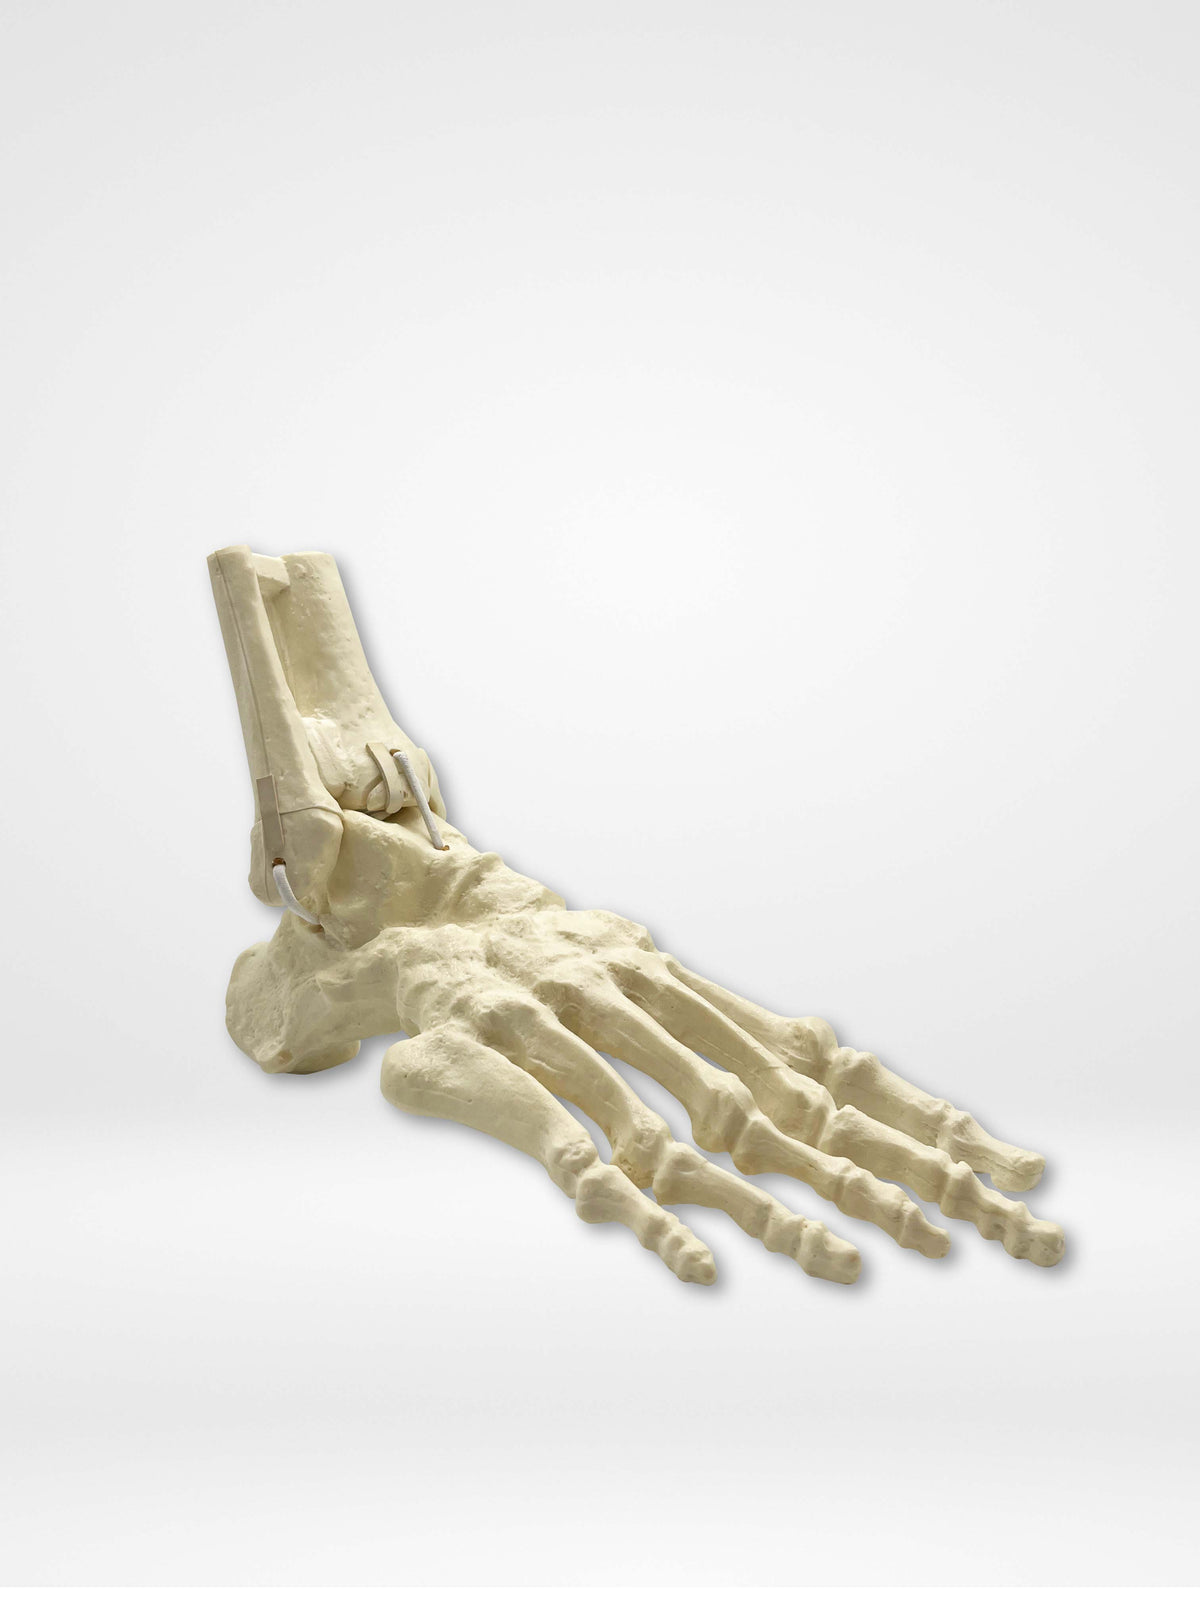 9699 - RIGHT ANKLE - FRACTURE 1